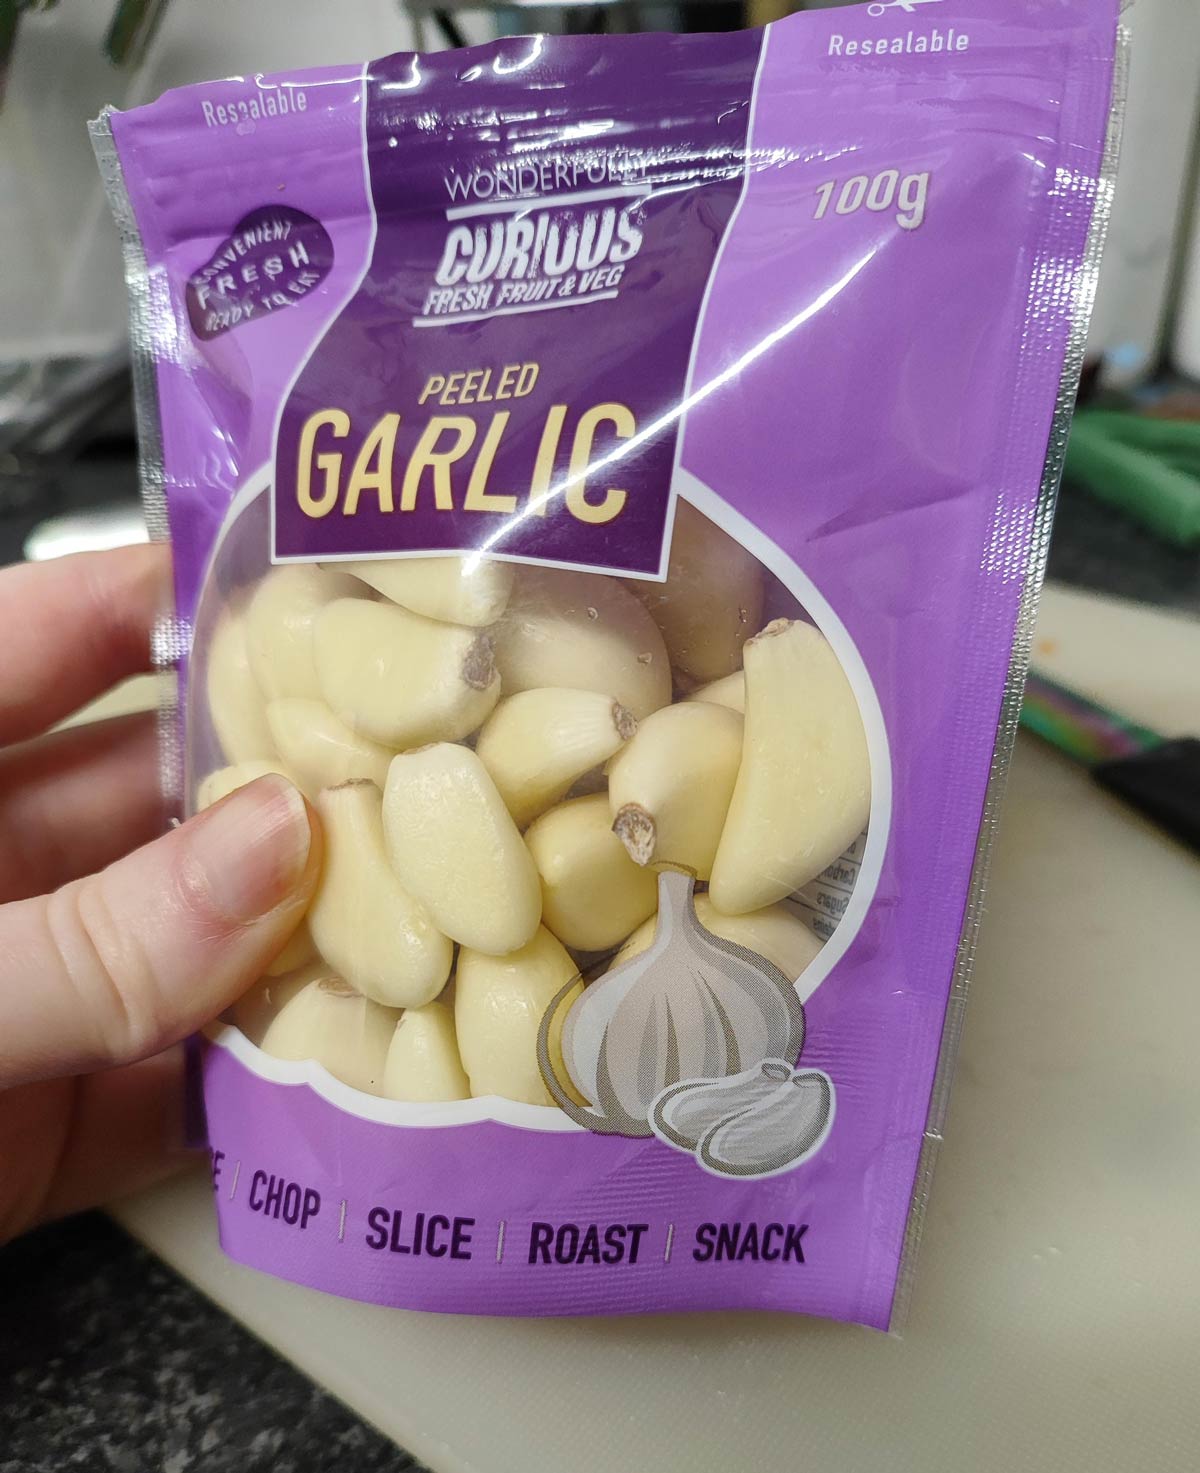 My peeled garlic suggests eating it as a snack